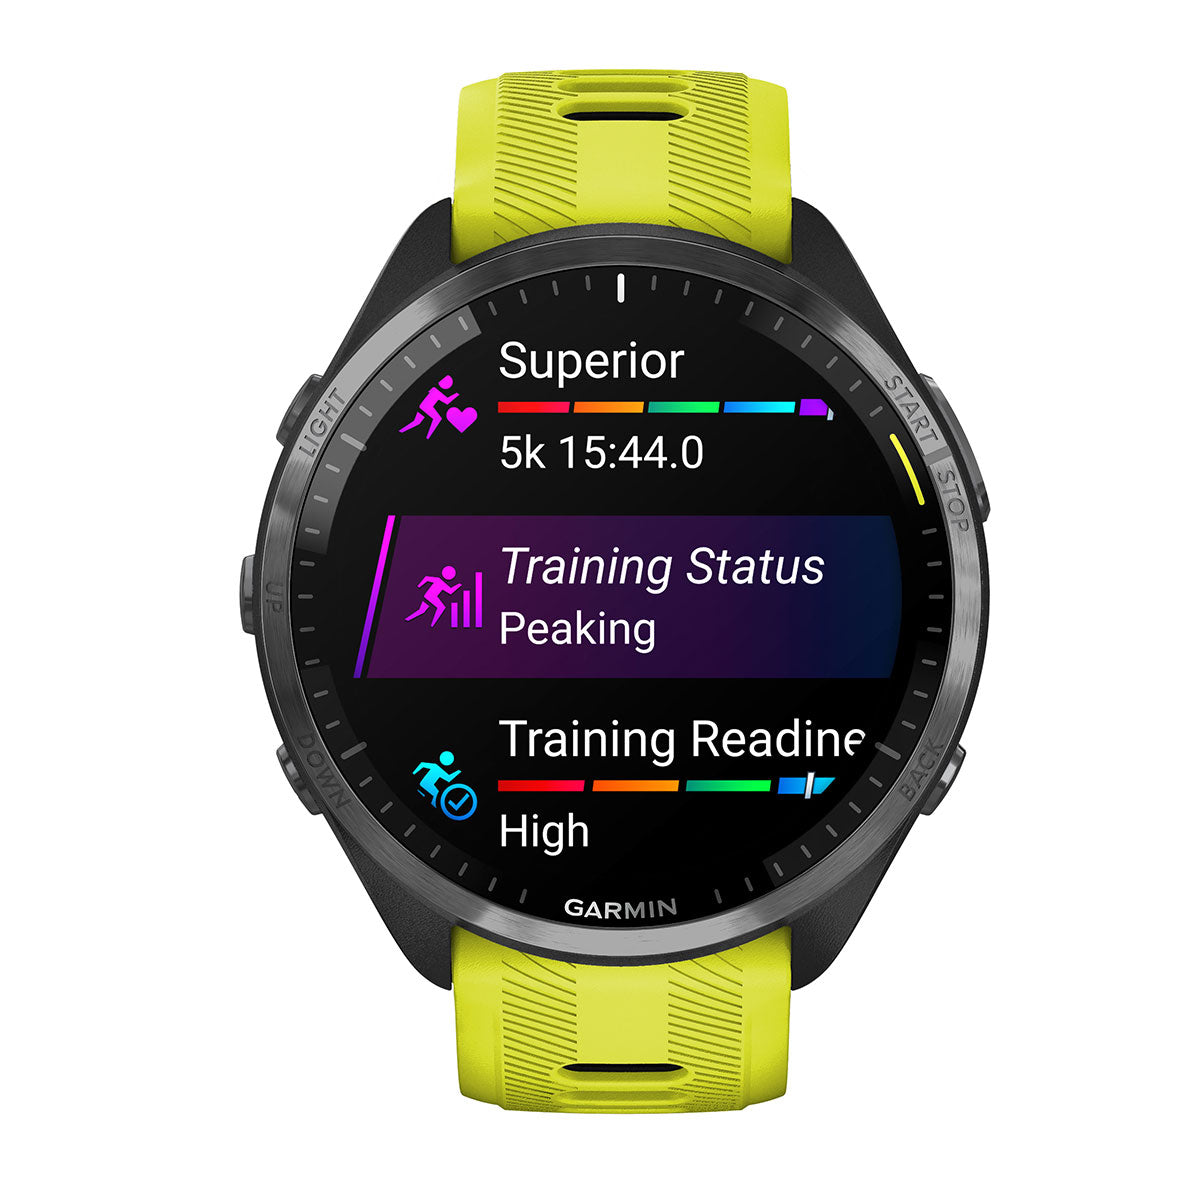 Garmin Forerunner 965 (Amp Yellow/Black) Premium Running GPS Smartwatch | Gift Box with PlayBetter HD Screen Protectors, Wall Adapter & Case - image 4 of 7